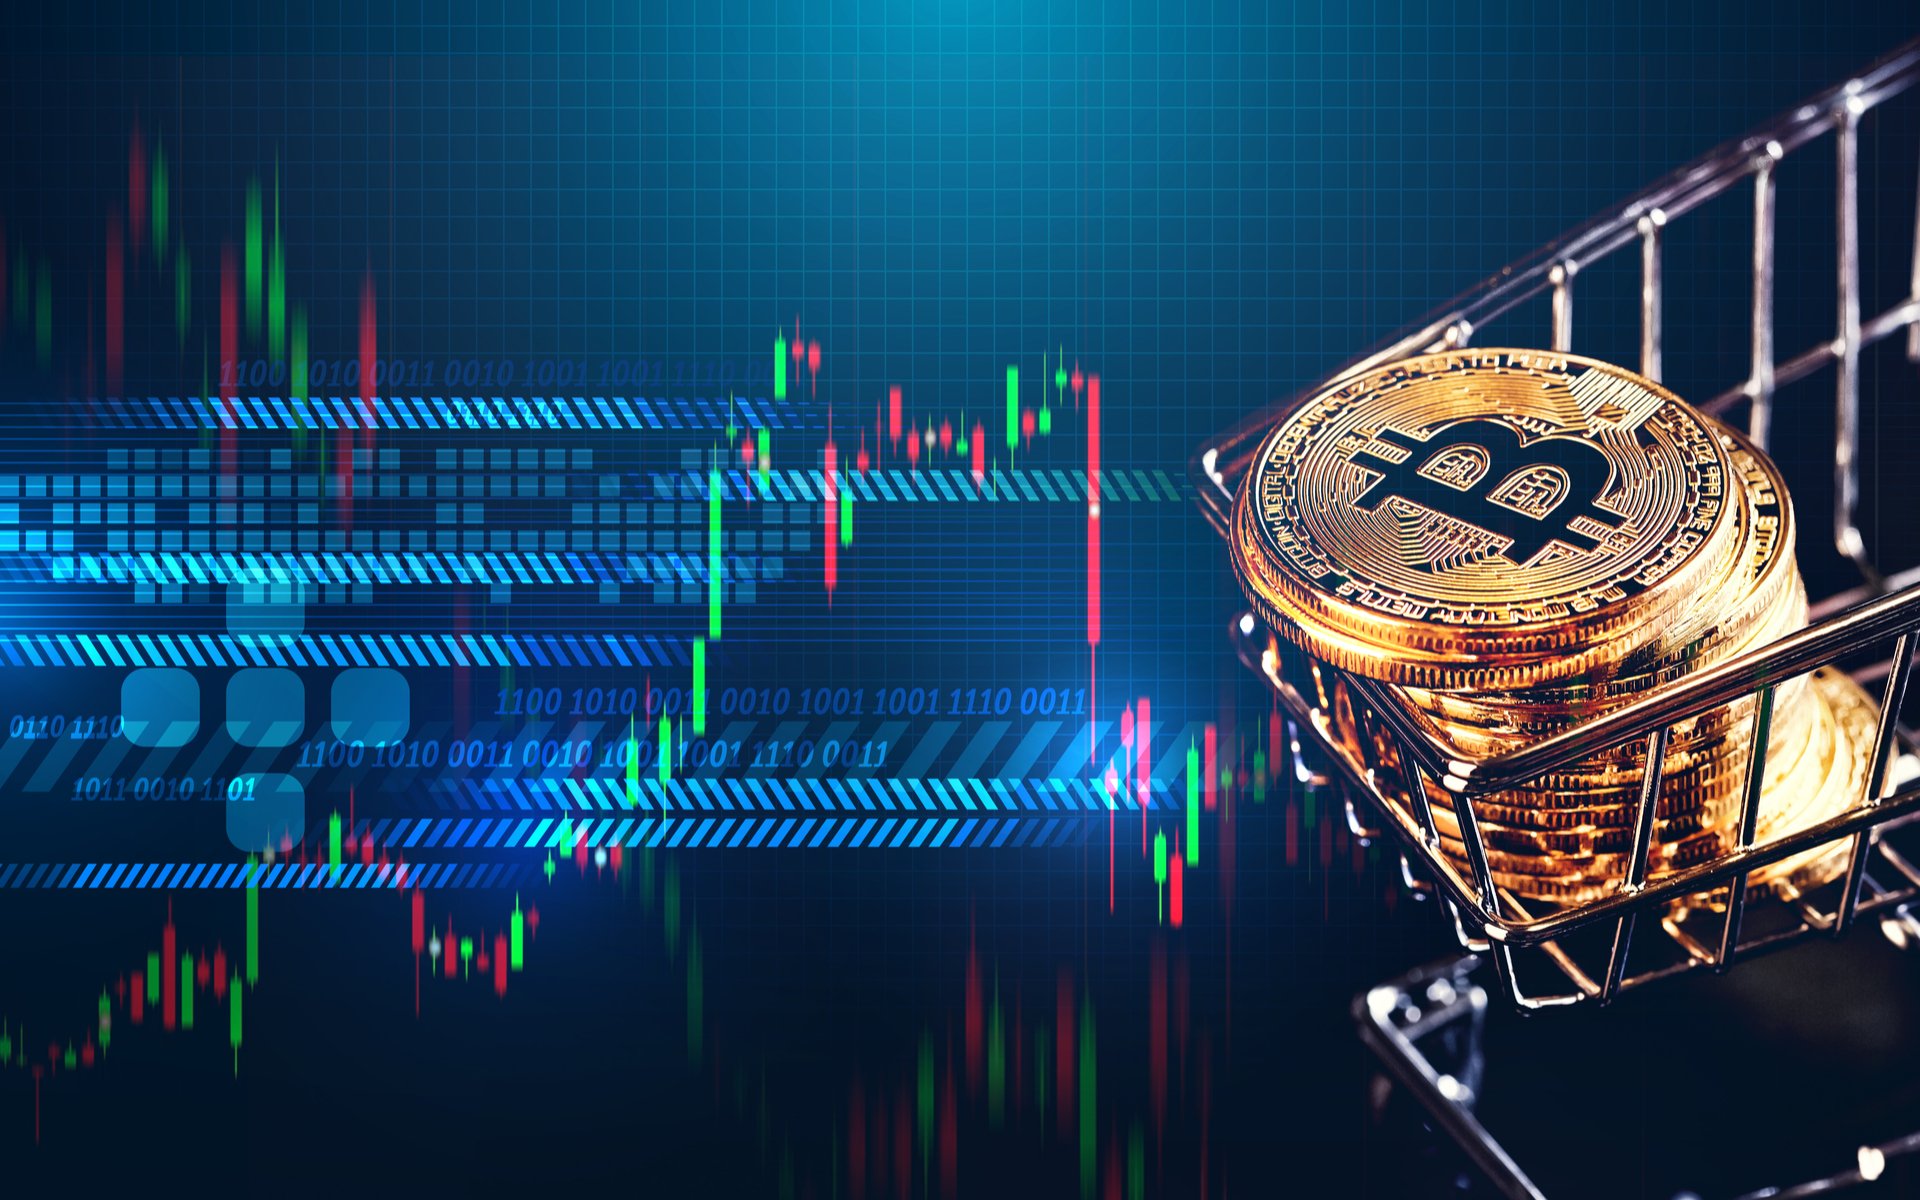 6 Recent Bitcoin Price Predictions from Industry Experts